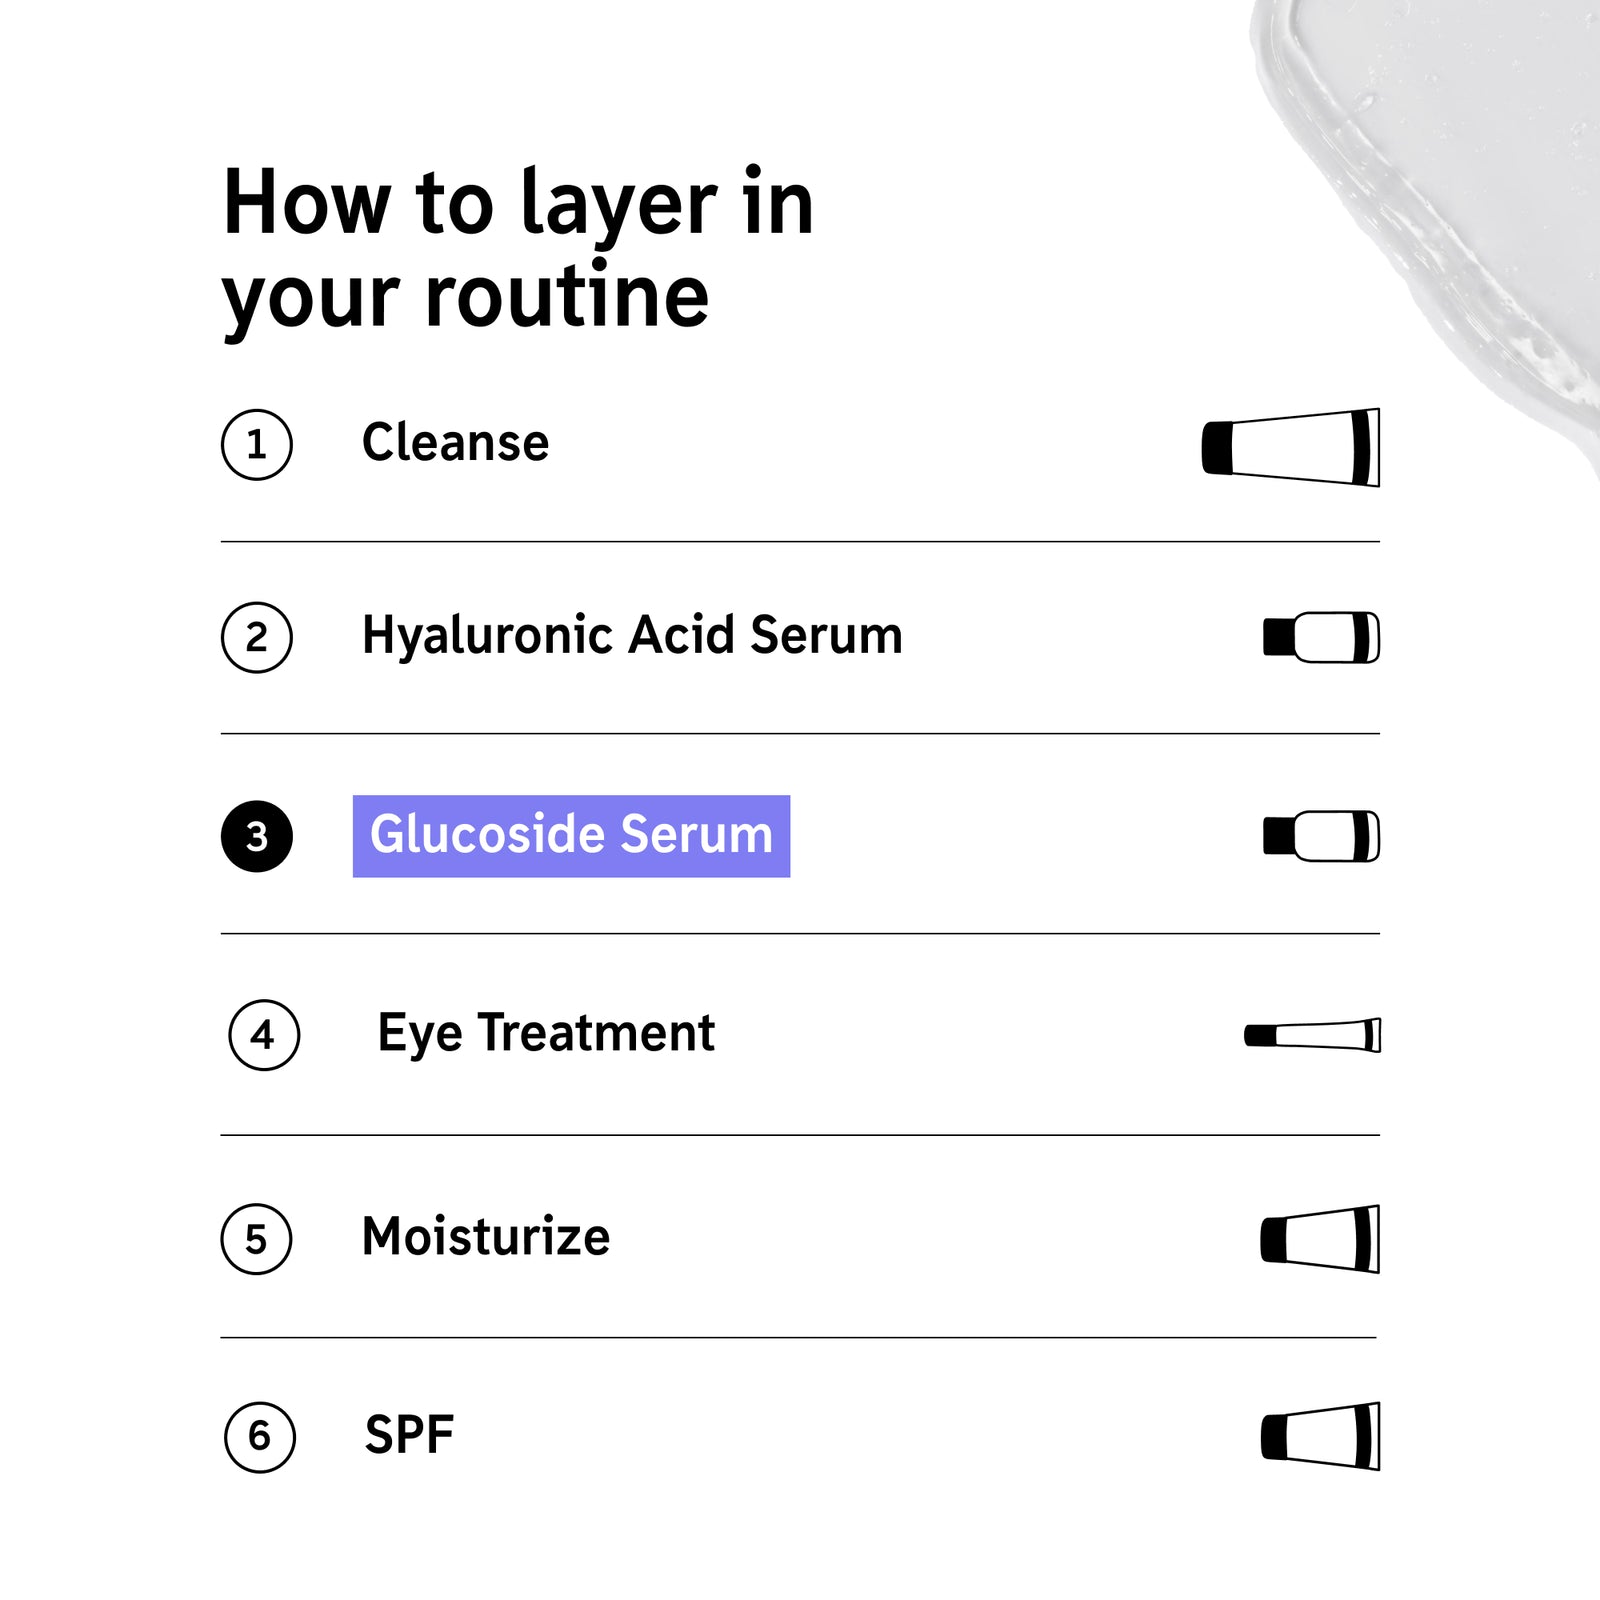 How to layer Glucoside Serum in your routine